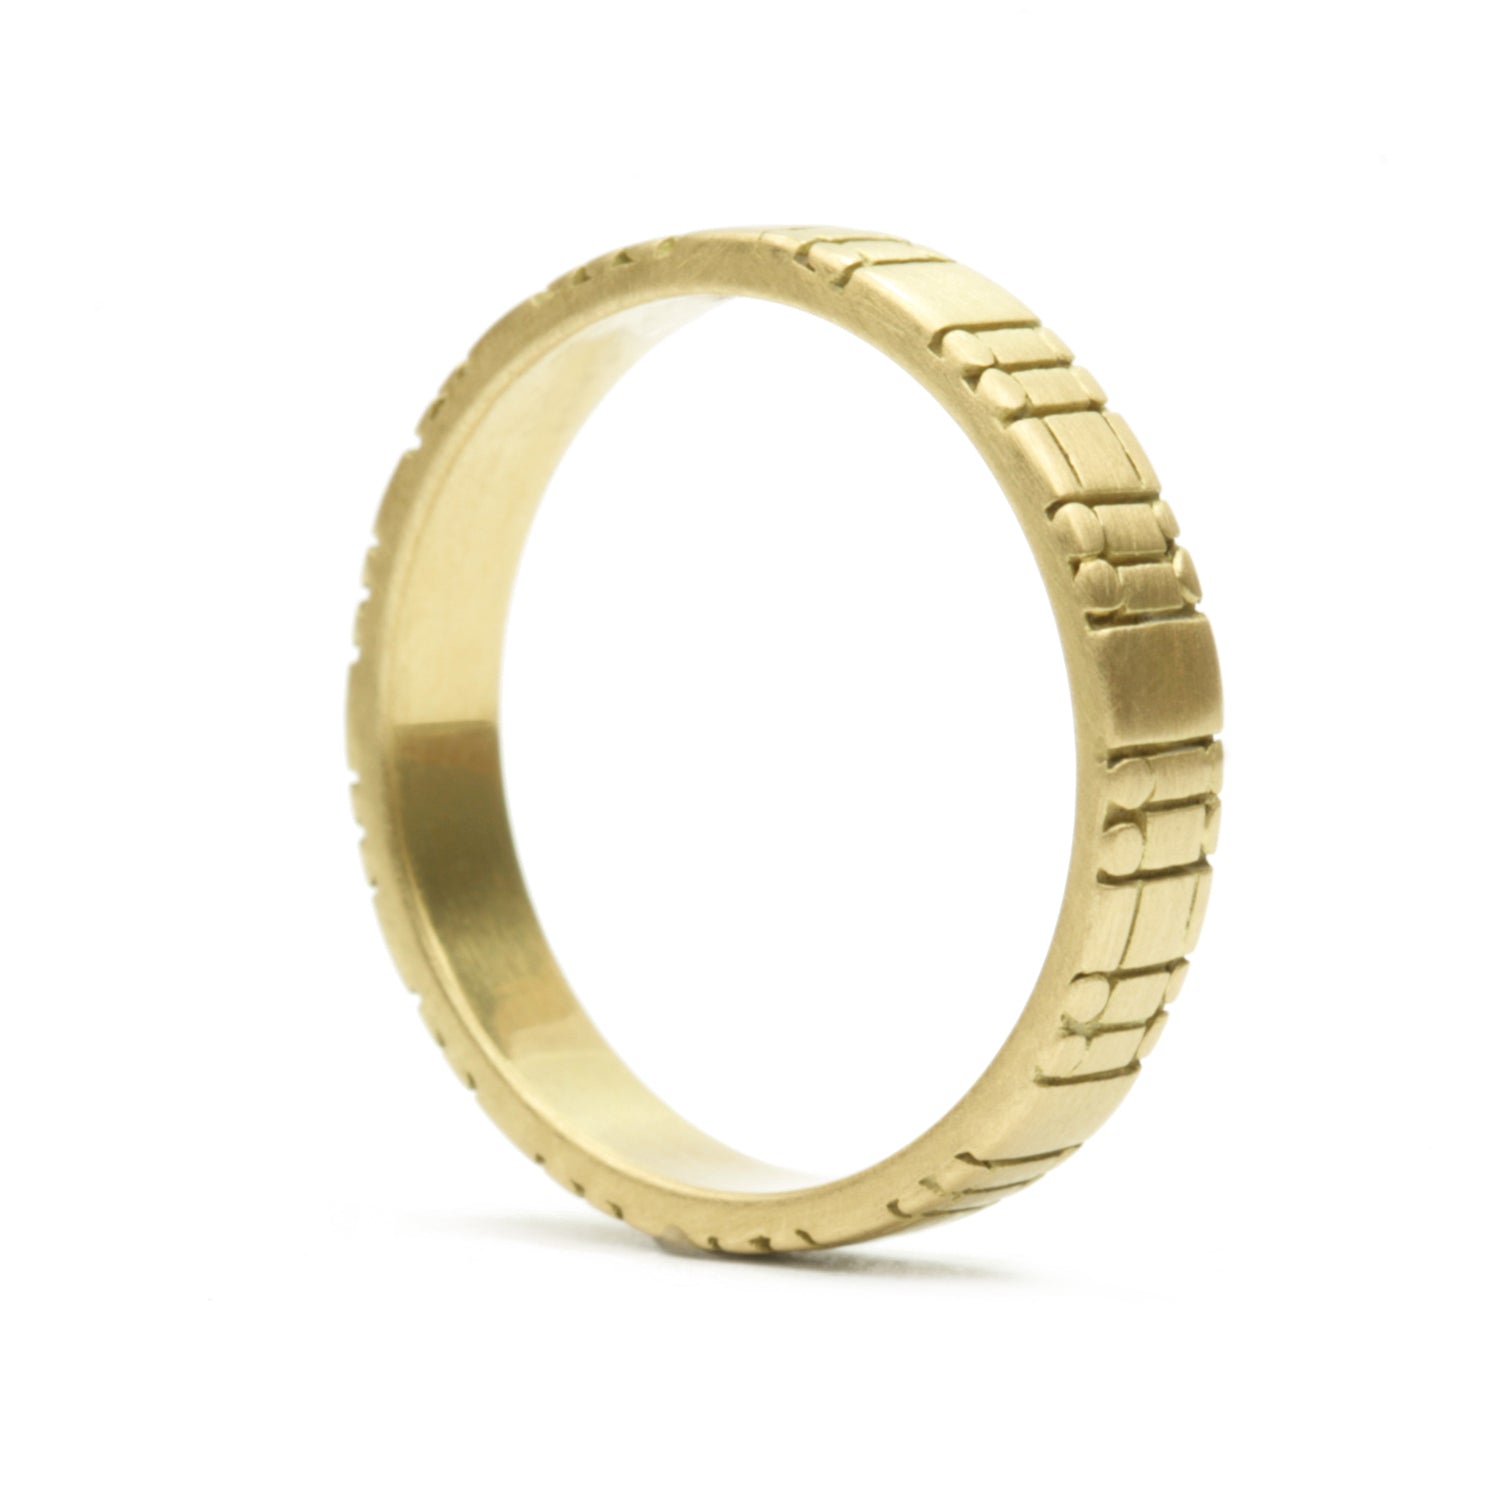 Code Band 3.6 mm in 18K yellow gold, side view